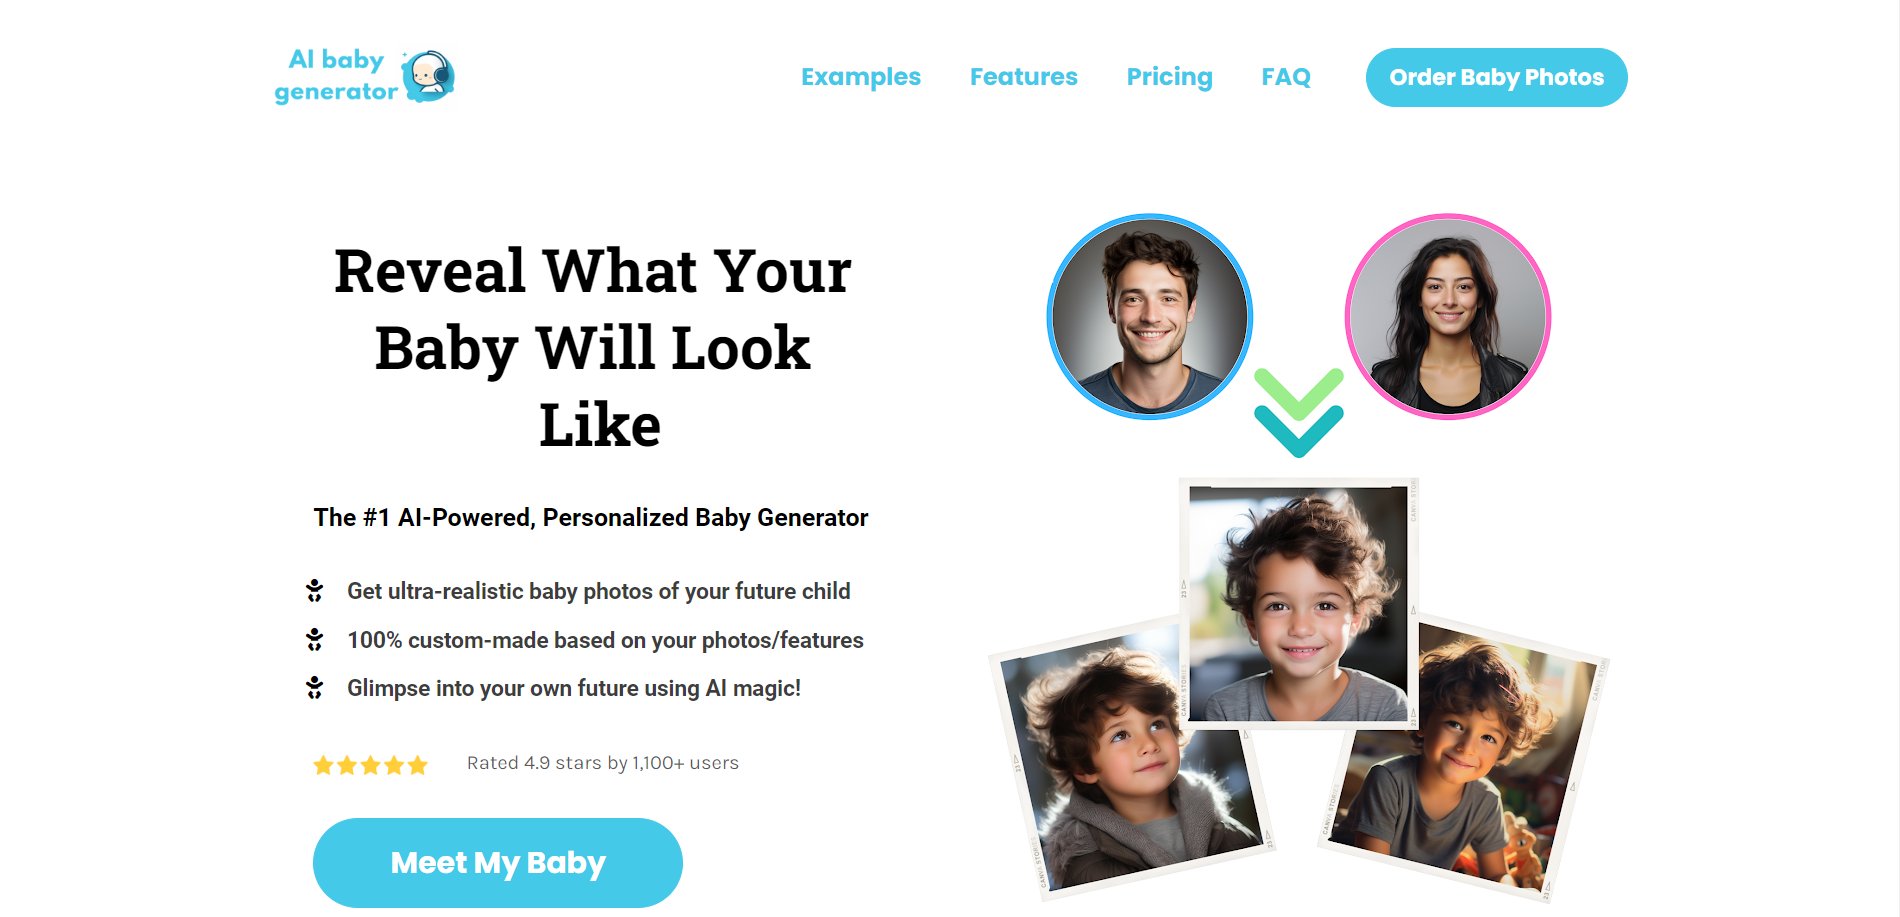 AI Baby GeneratorThe AI Baby Generator predicts a babys appearance